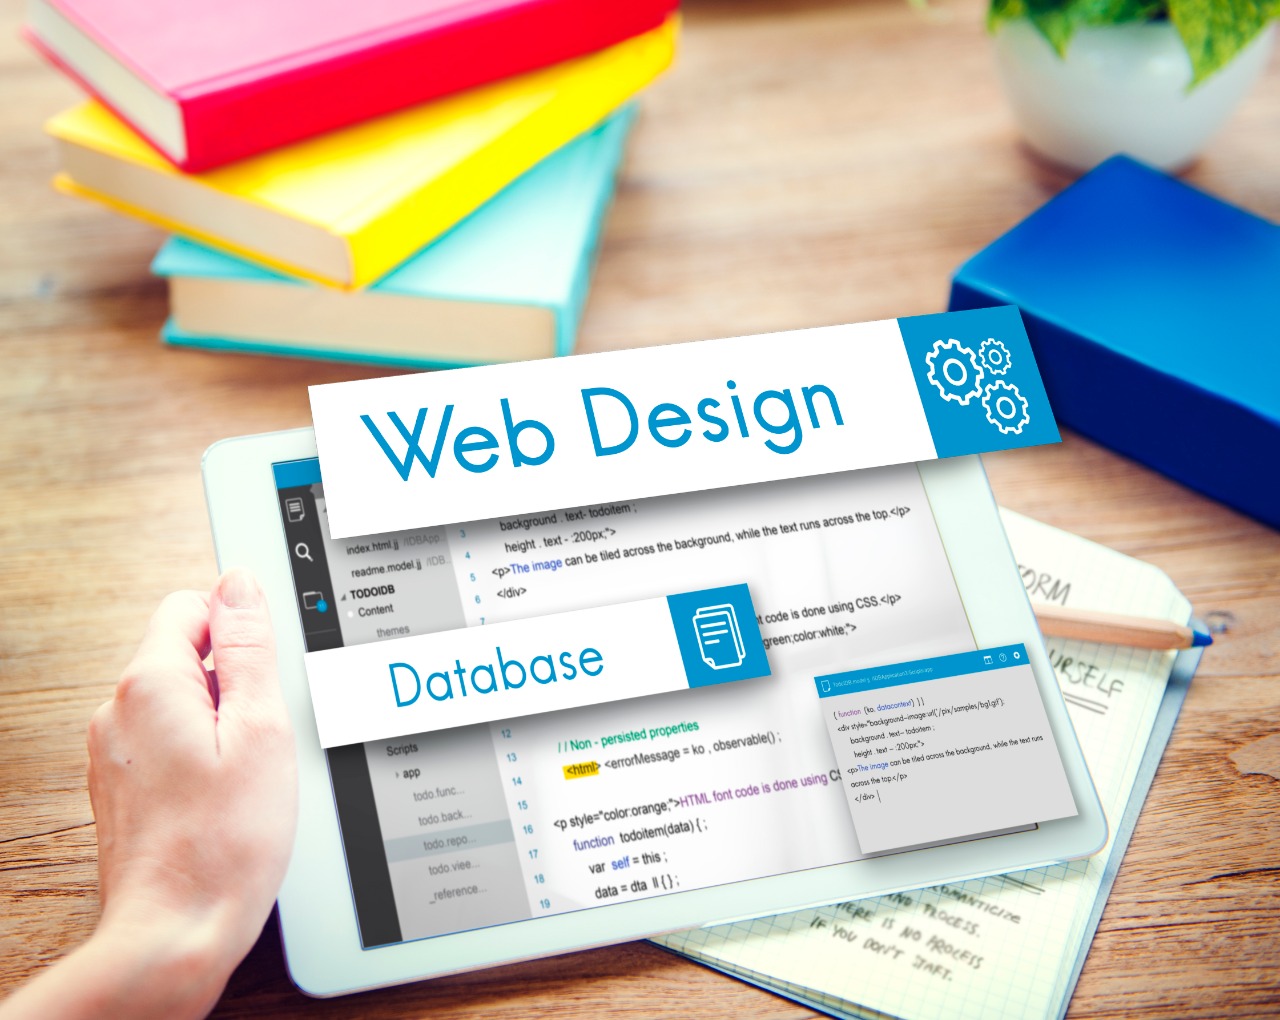 What to consider when choosing Web Design Agency in South Africa